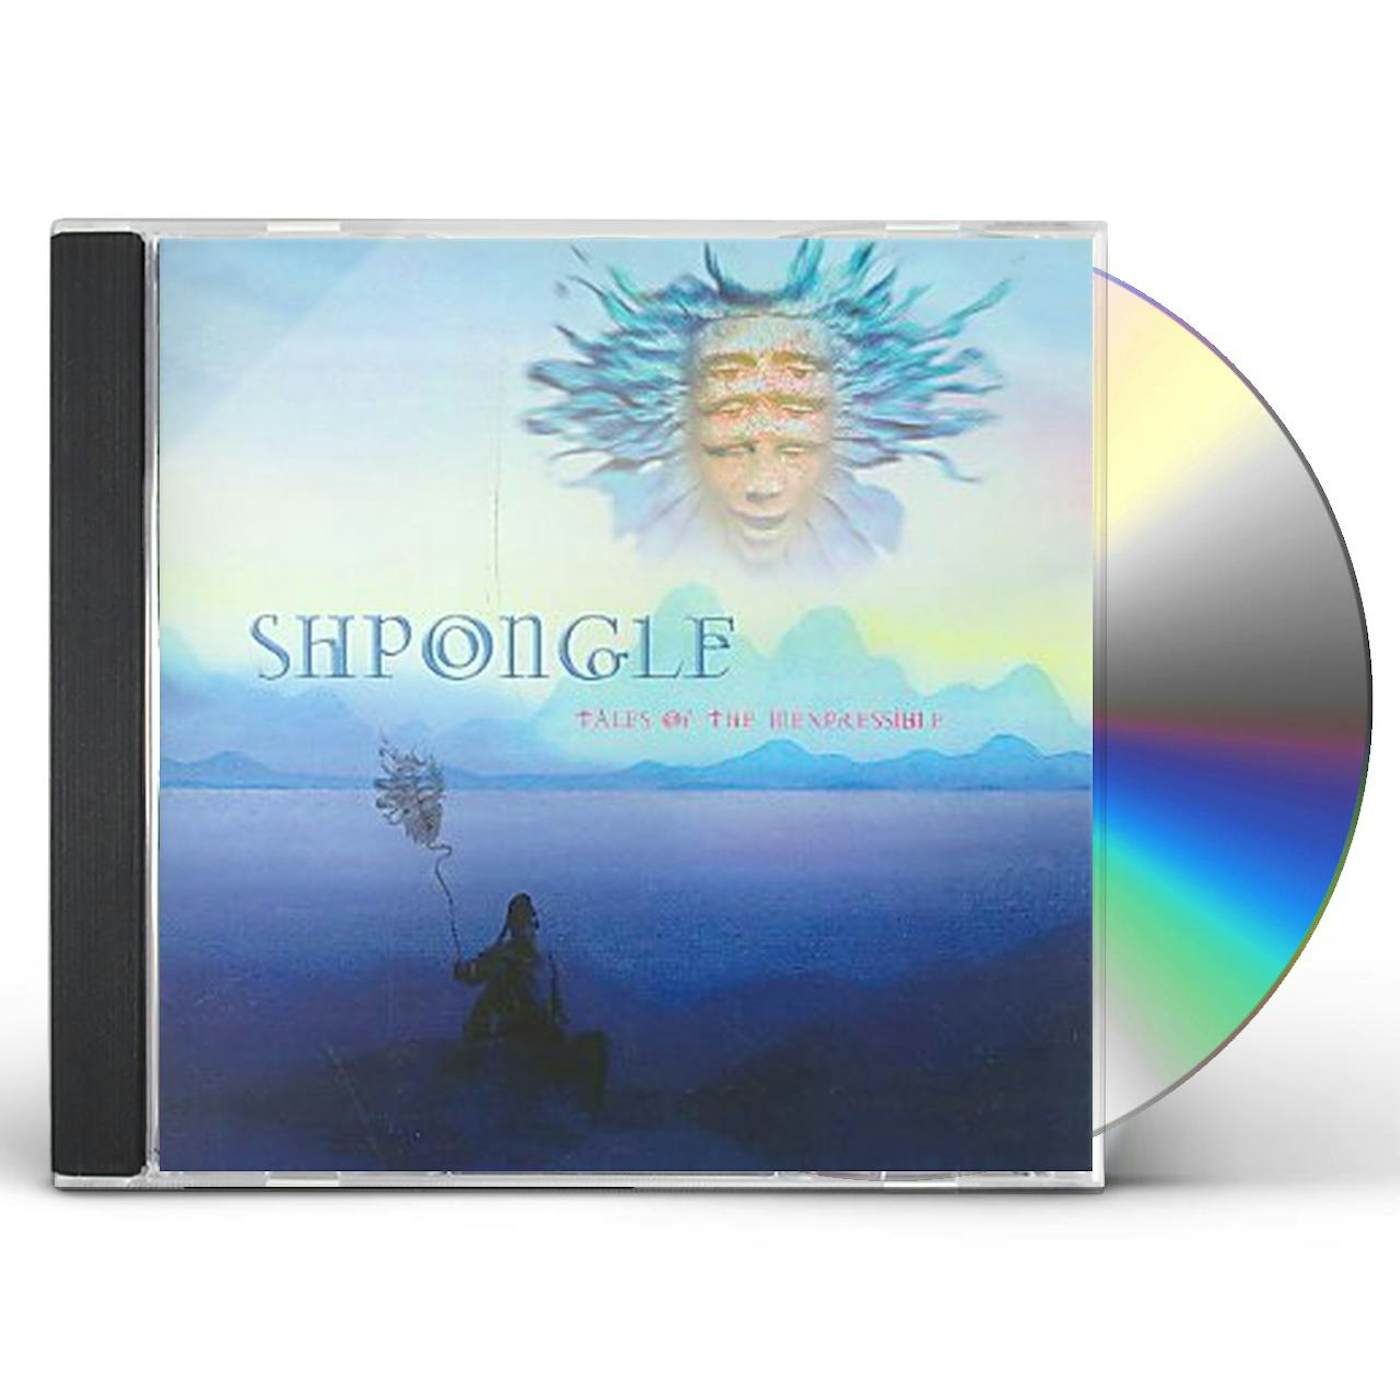 Shpongle TALES OF THE INEXPRESSIBLE CD